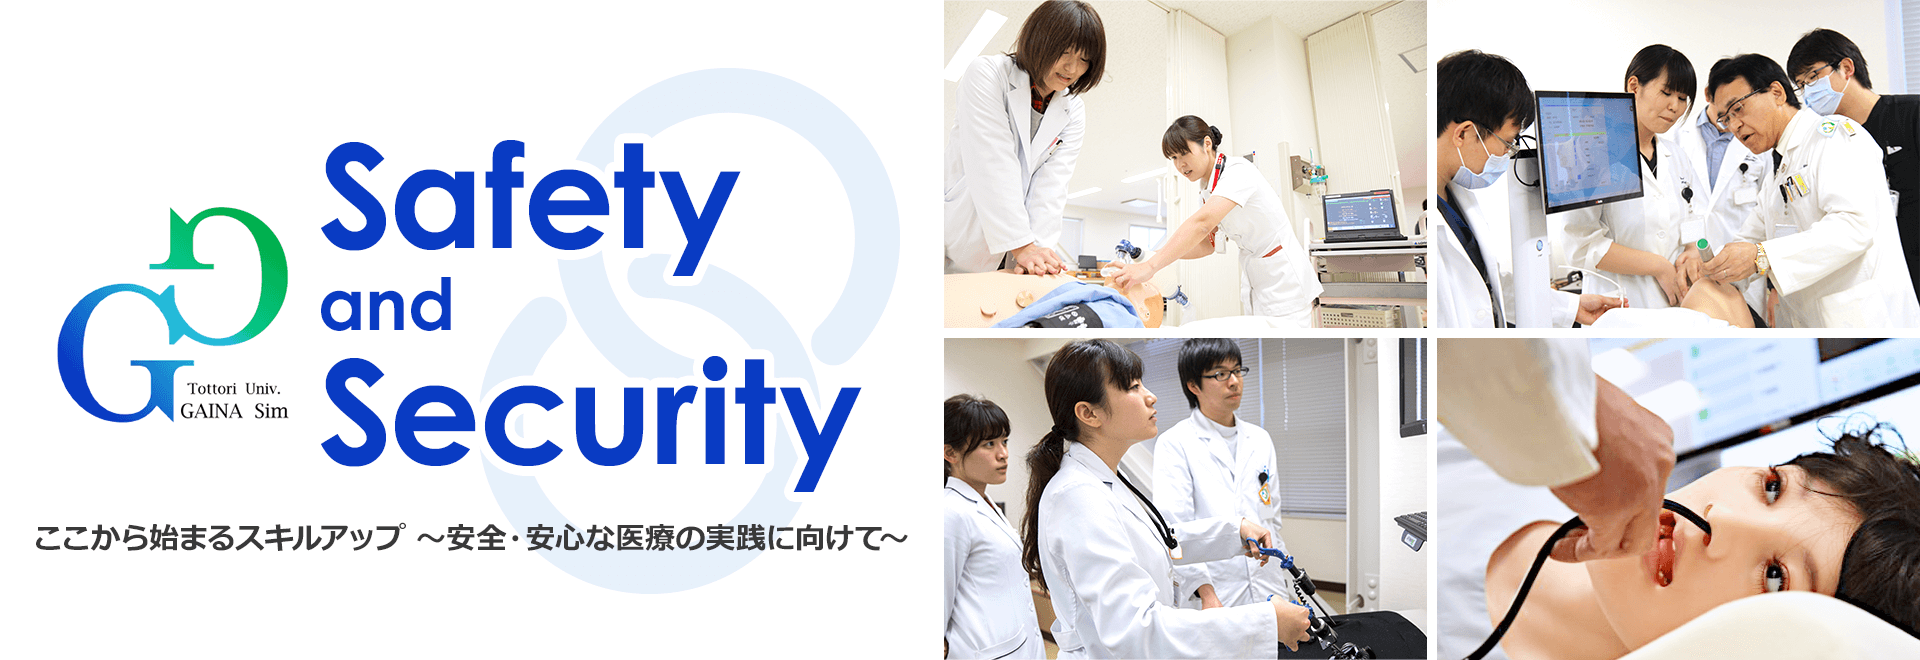 Safety and Security 安心・安全な医療を目指して